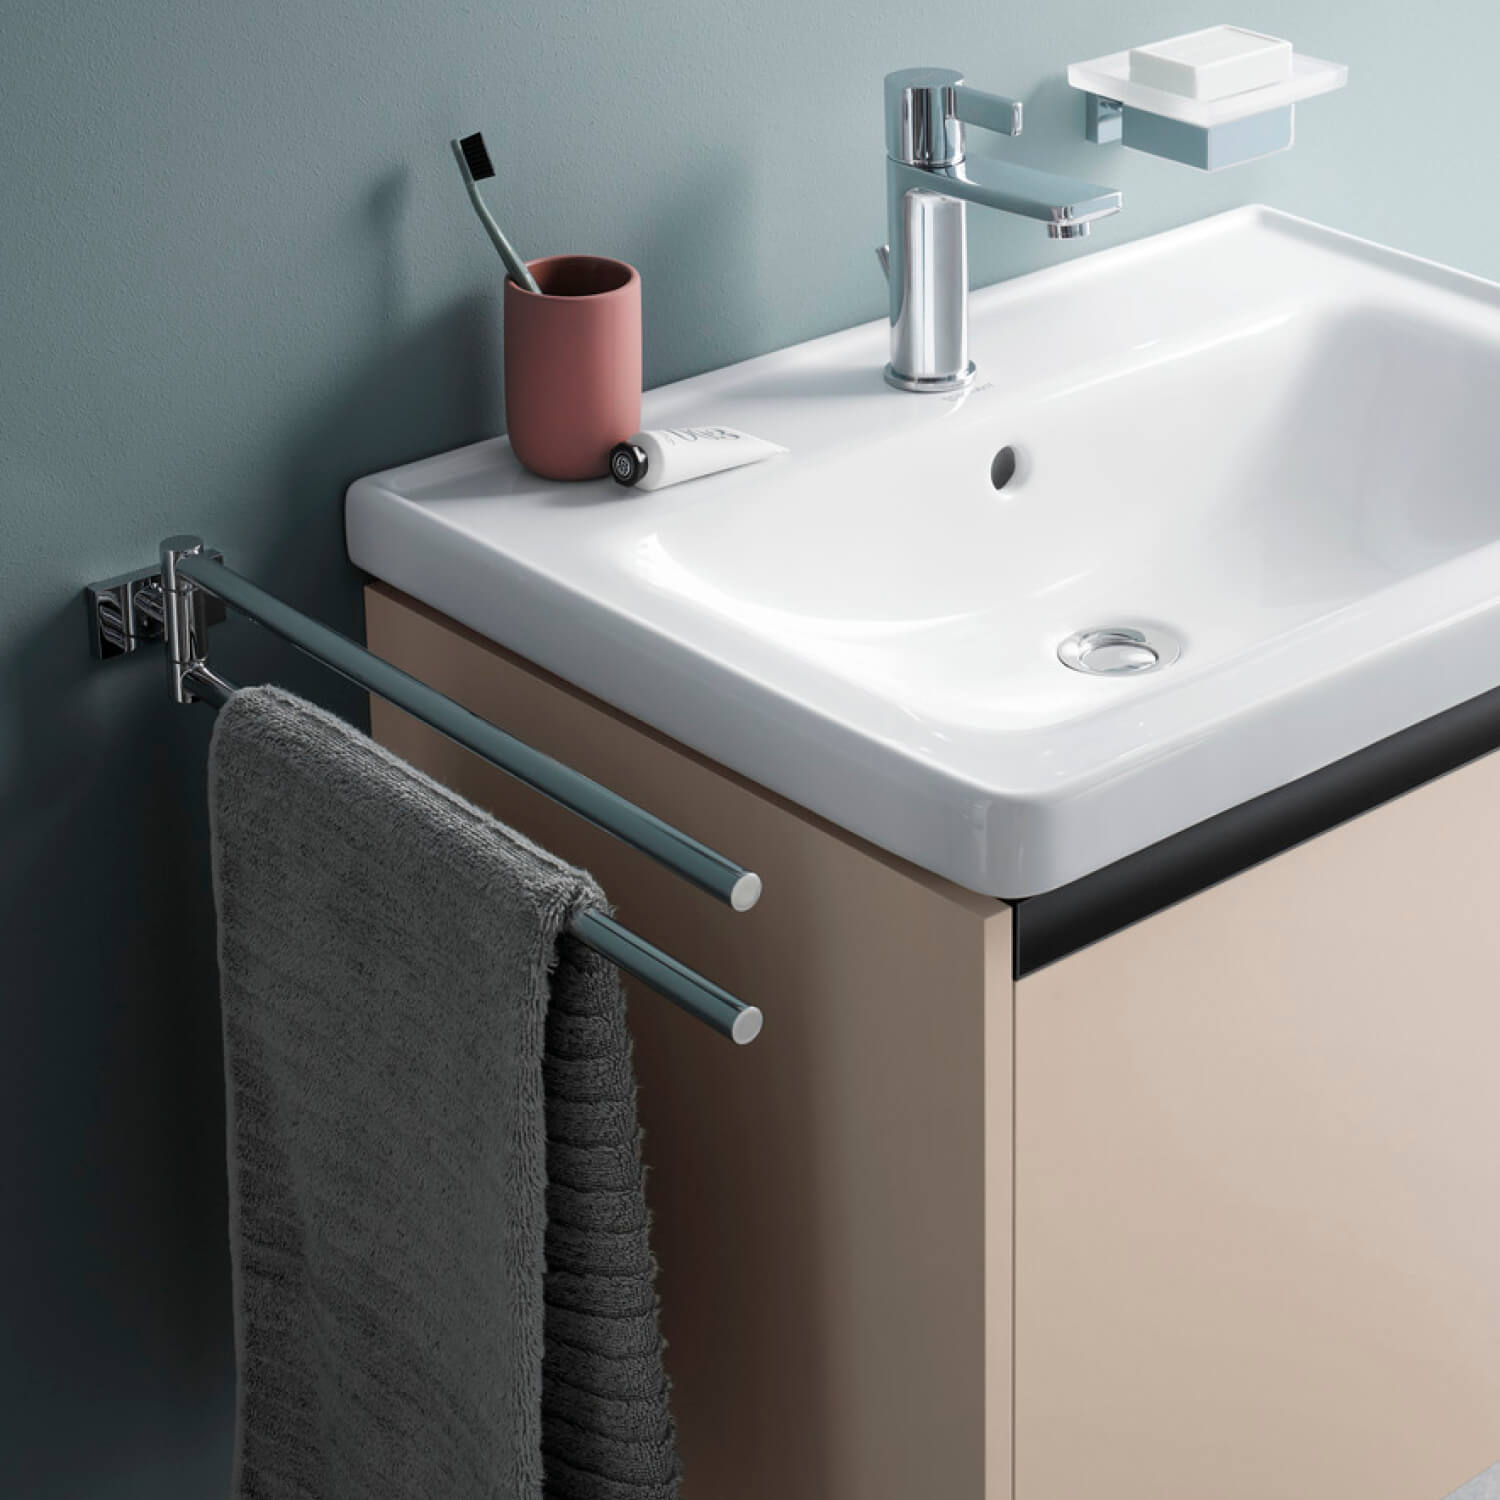 D-Neo faucet and Ketho.2 washbasin cabinet


